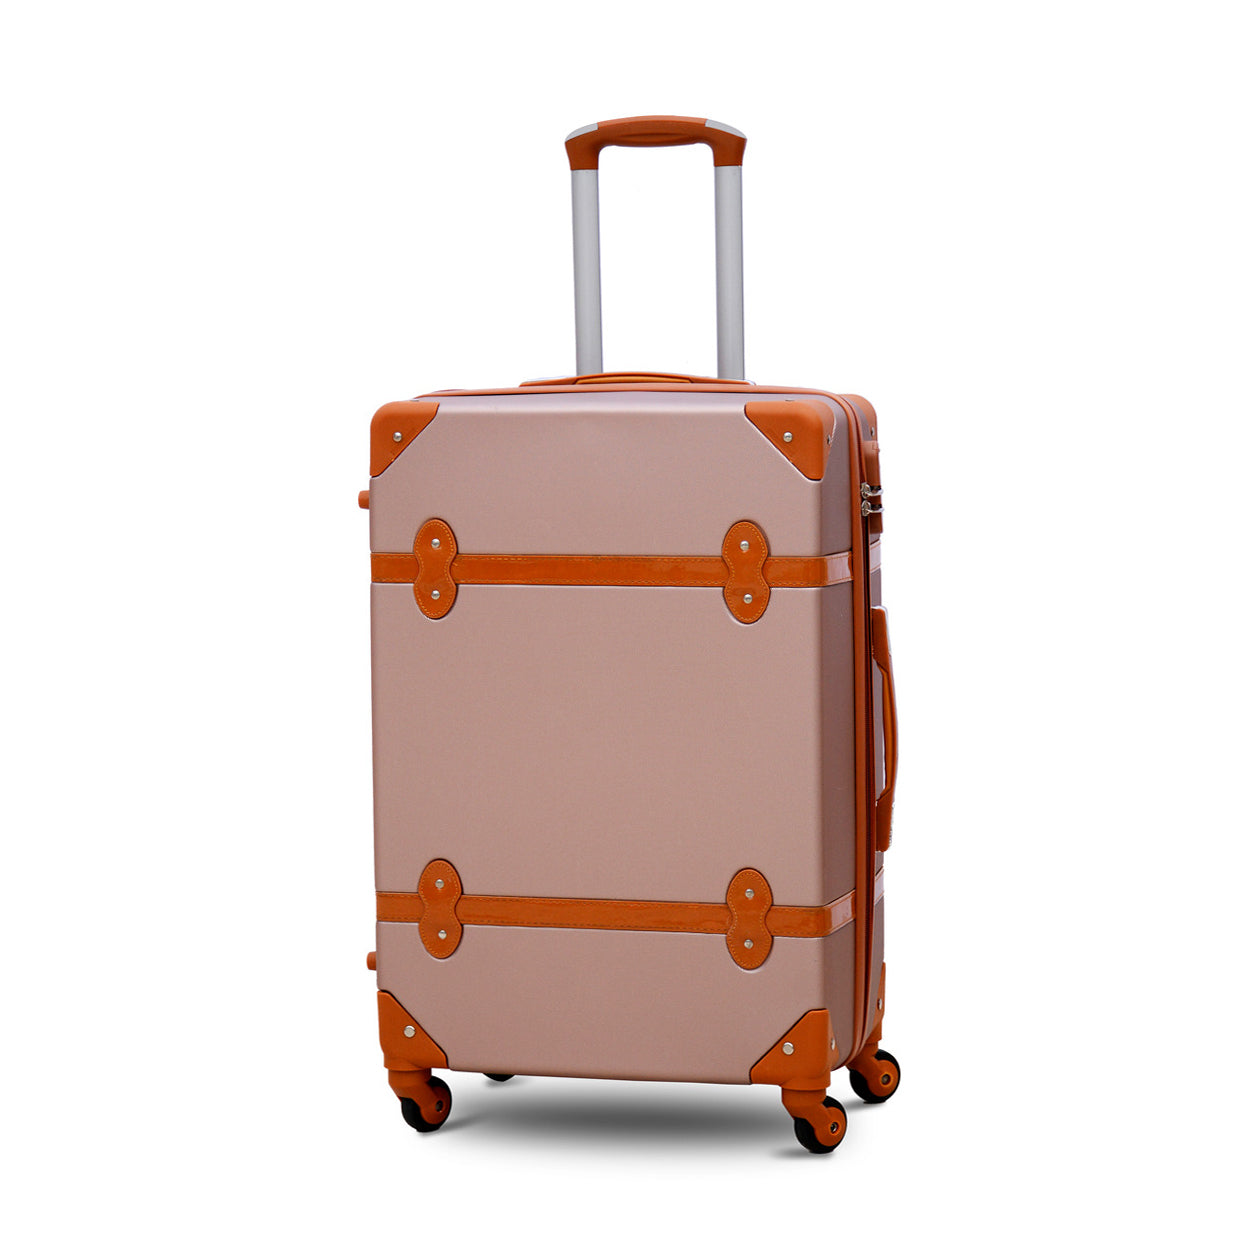 28" Lightweight ABS Corner Guard Luggage | Rose Gold Colour Hard Case Trolley Bag